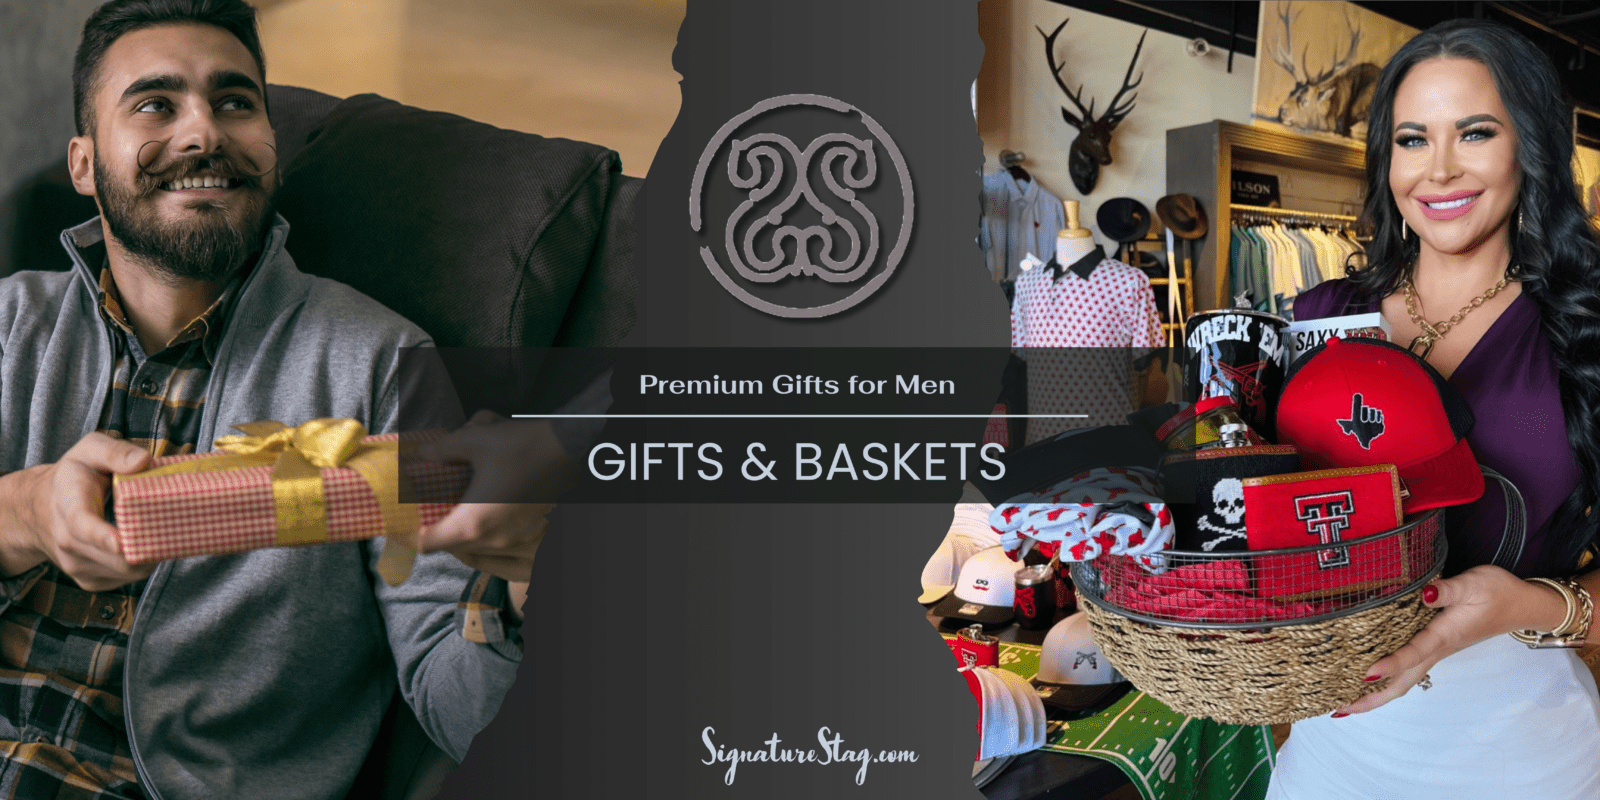 Find Premium Gifts for Men in Lubbock and Midland Texas Clothing Stores. Best Men Gift Baskets and Gift Wrapping for you Husband, Father or Friend.